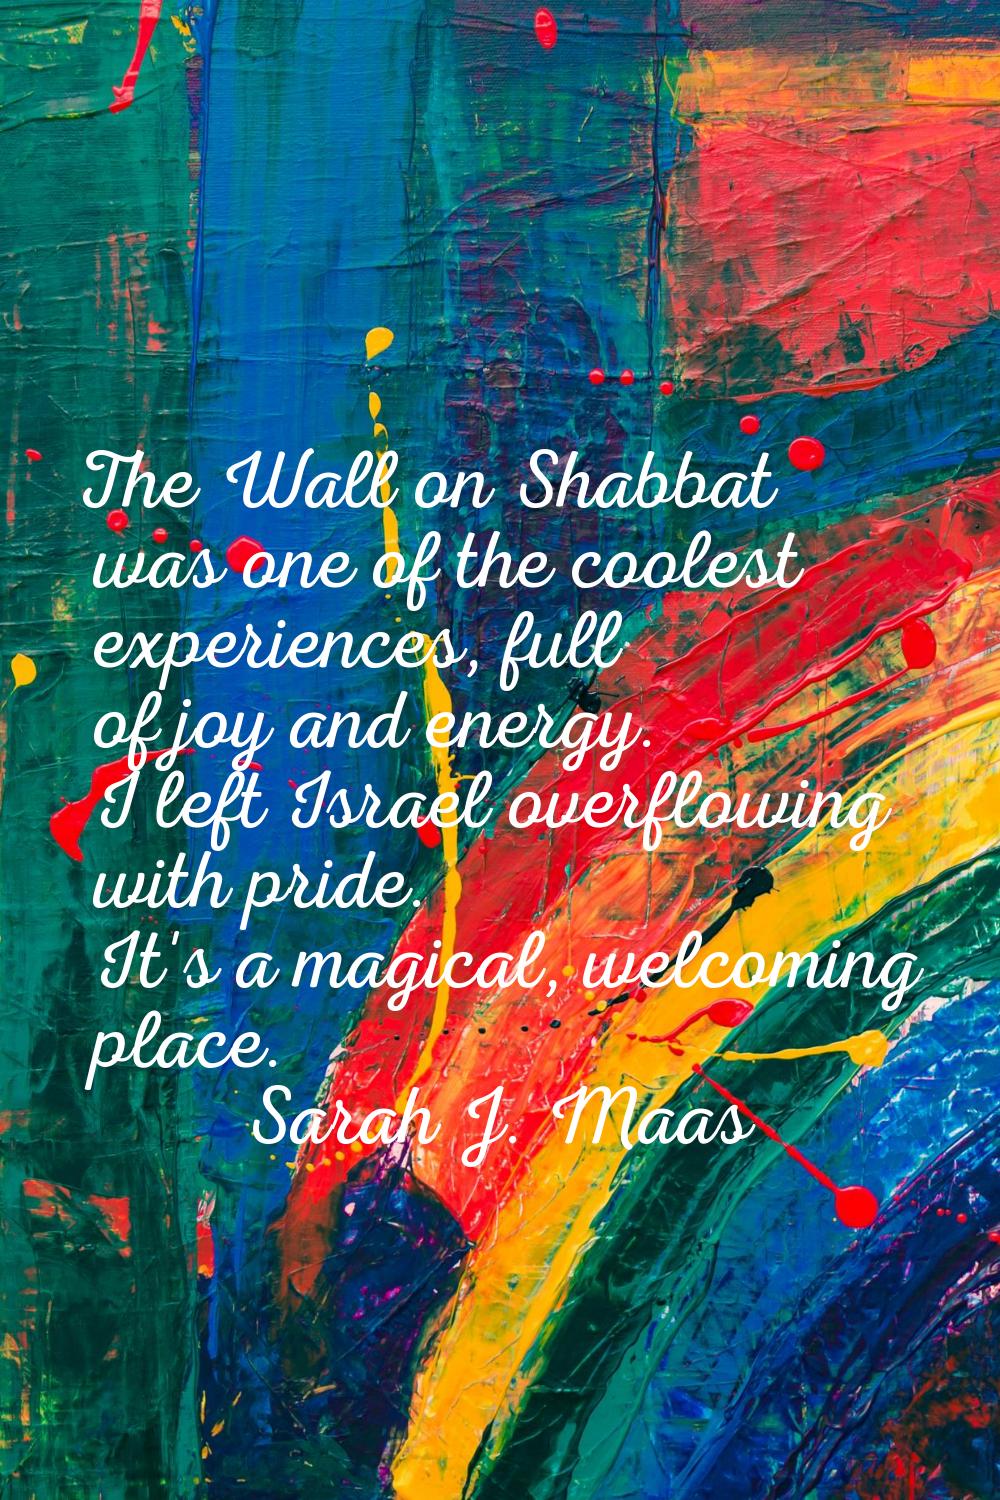 The Wall on Shabbat was one of the coolest experiences, full of joy and energy. I left Israel overf